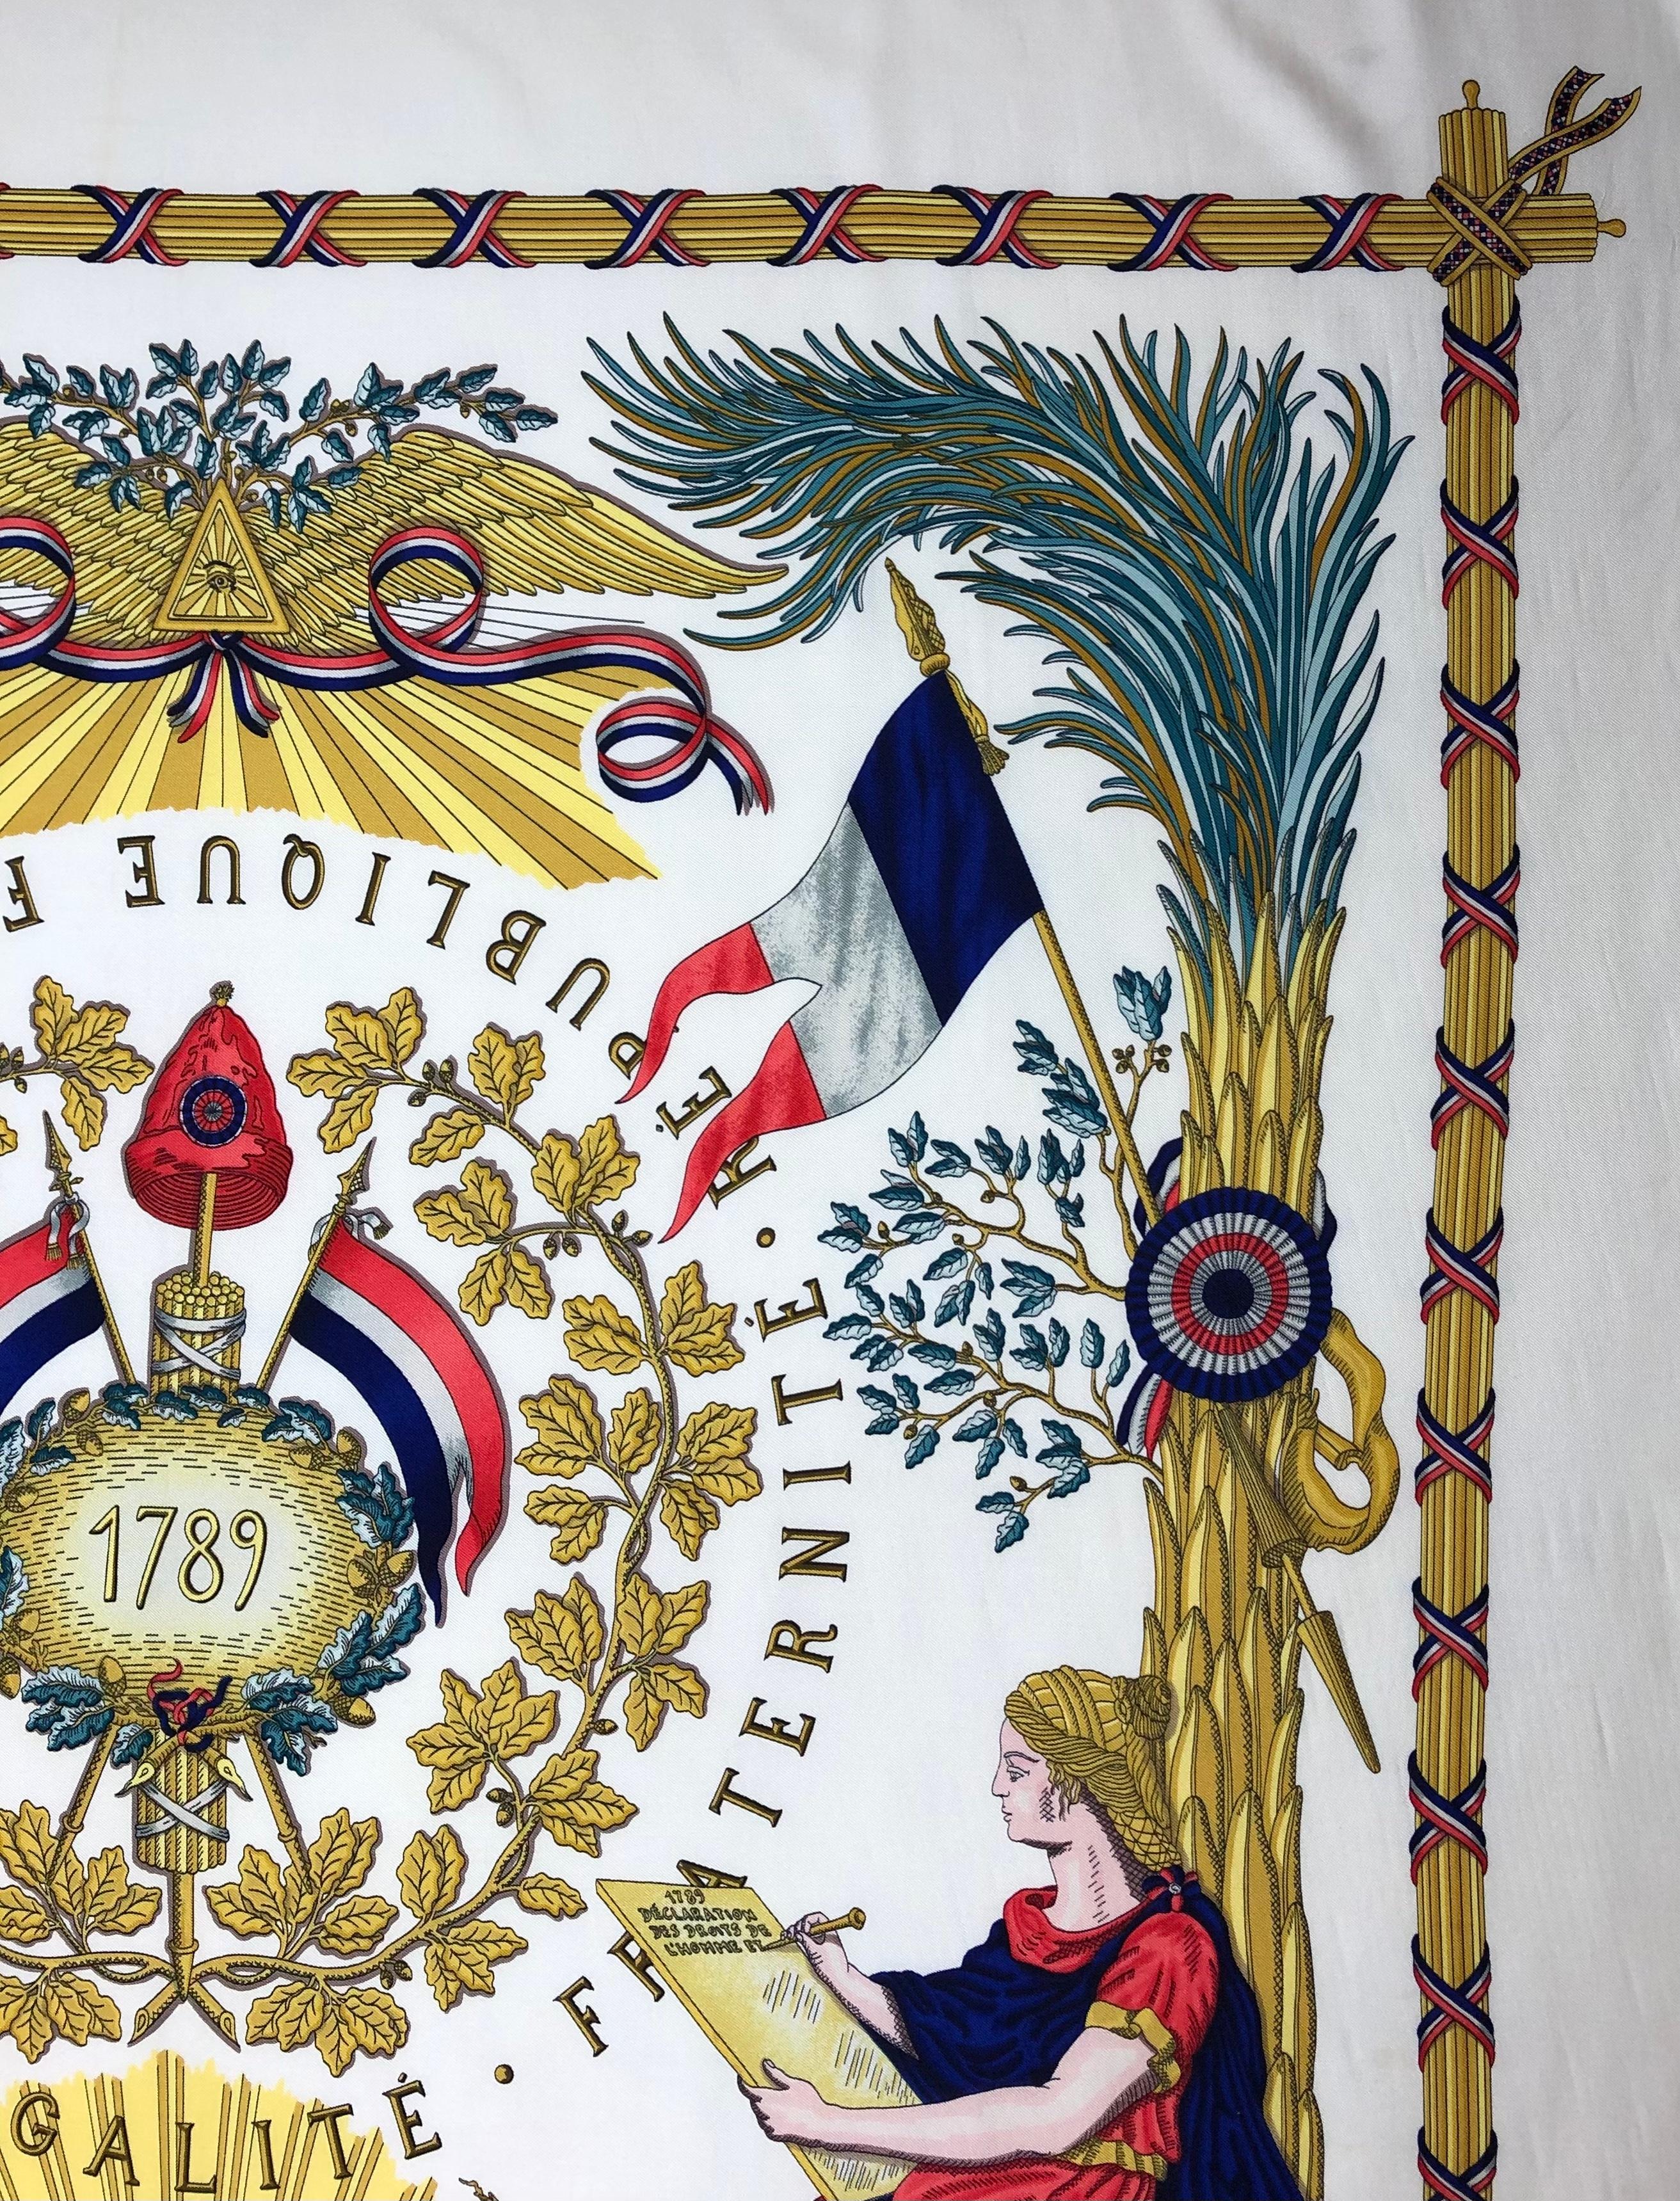 Vintage Hermes Scarf Wall Art Commemorative of the French Revolution, 1789 1